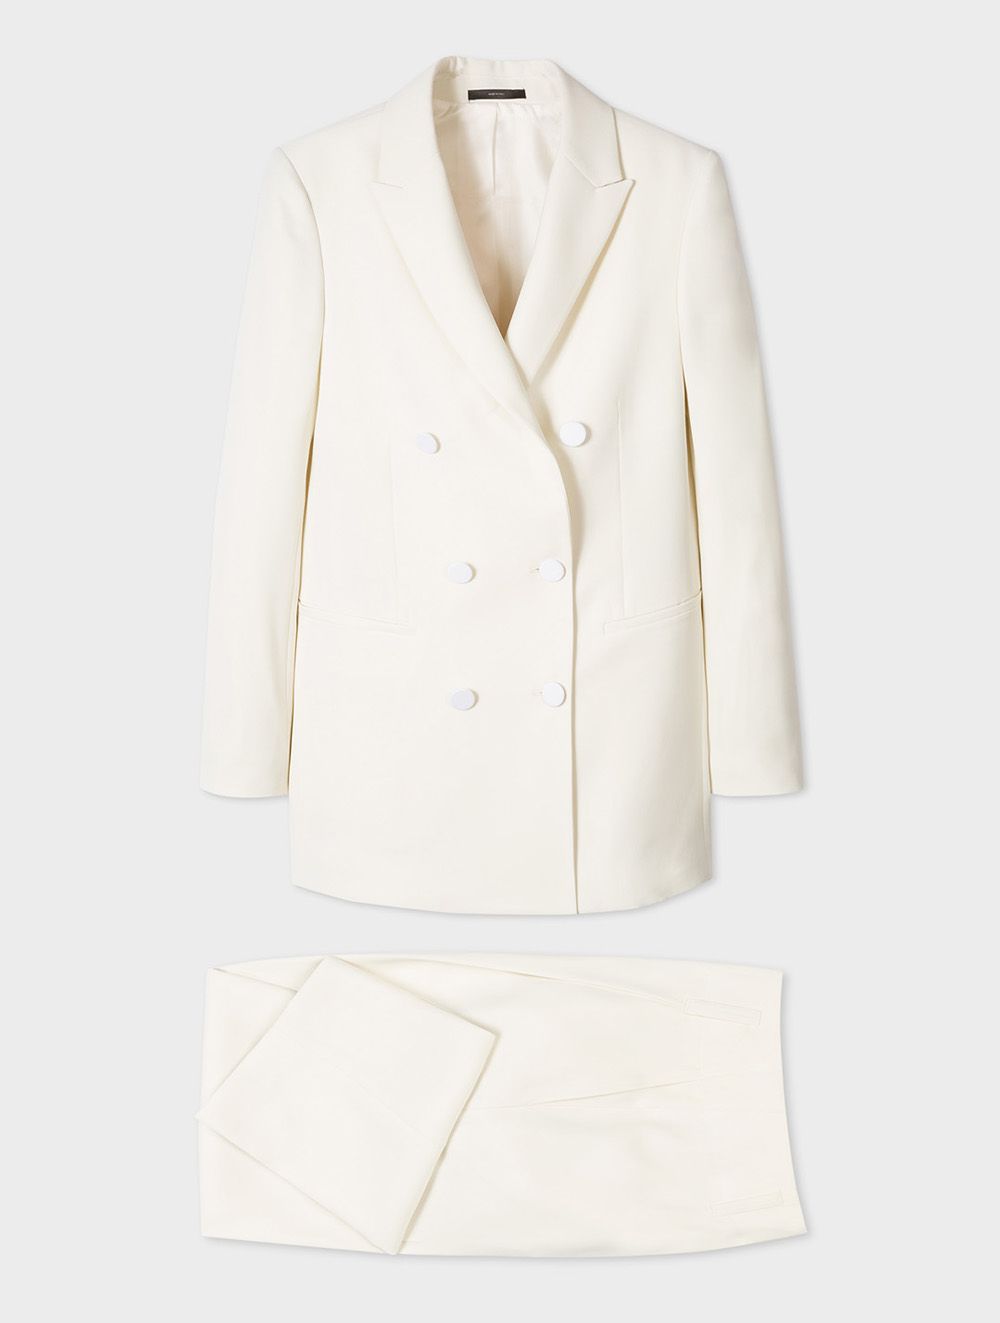 PAUL SMITH WOMEN'S IVORY DOUBLE-BREASTED TUXEDO SUIT, £670 (Dhs3,279)